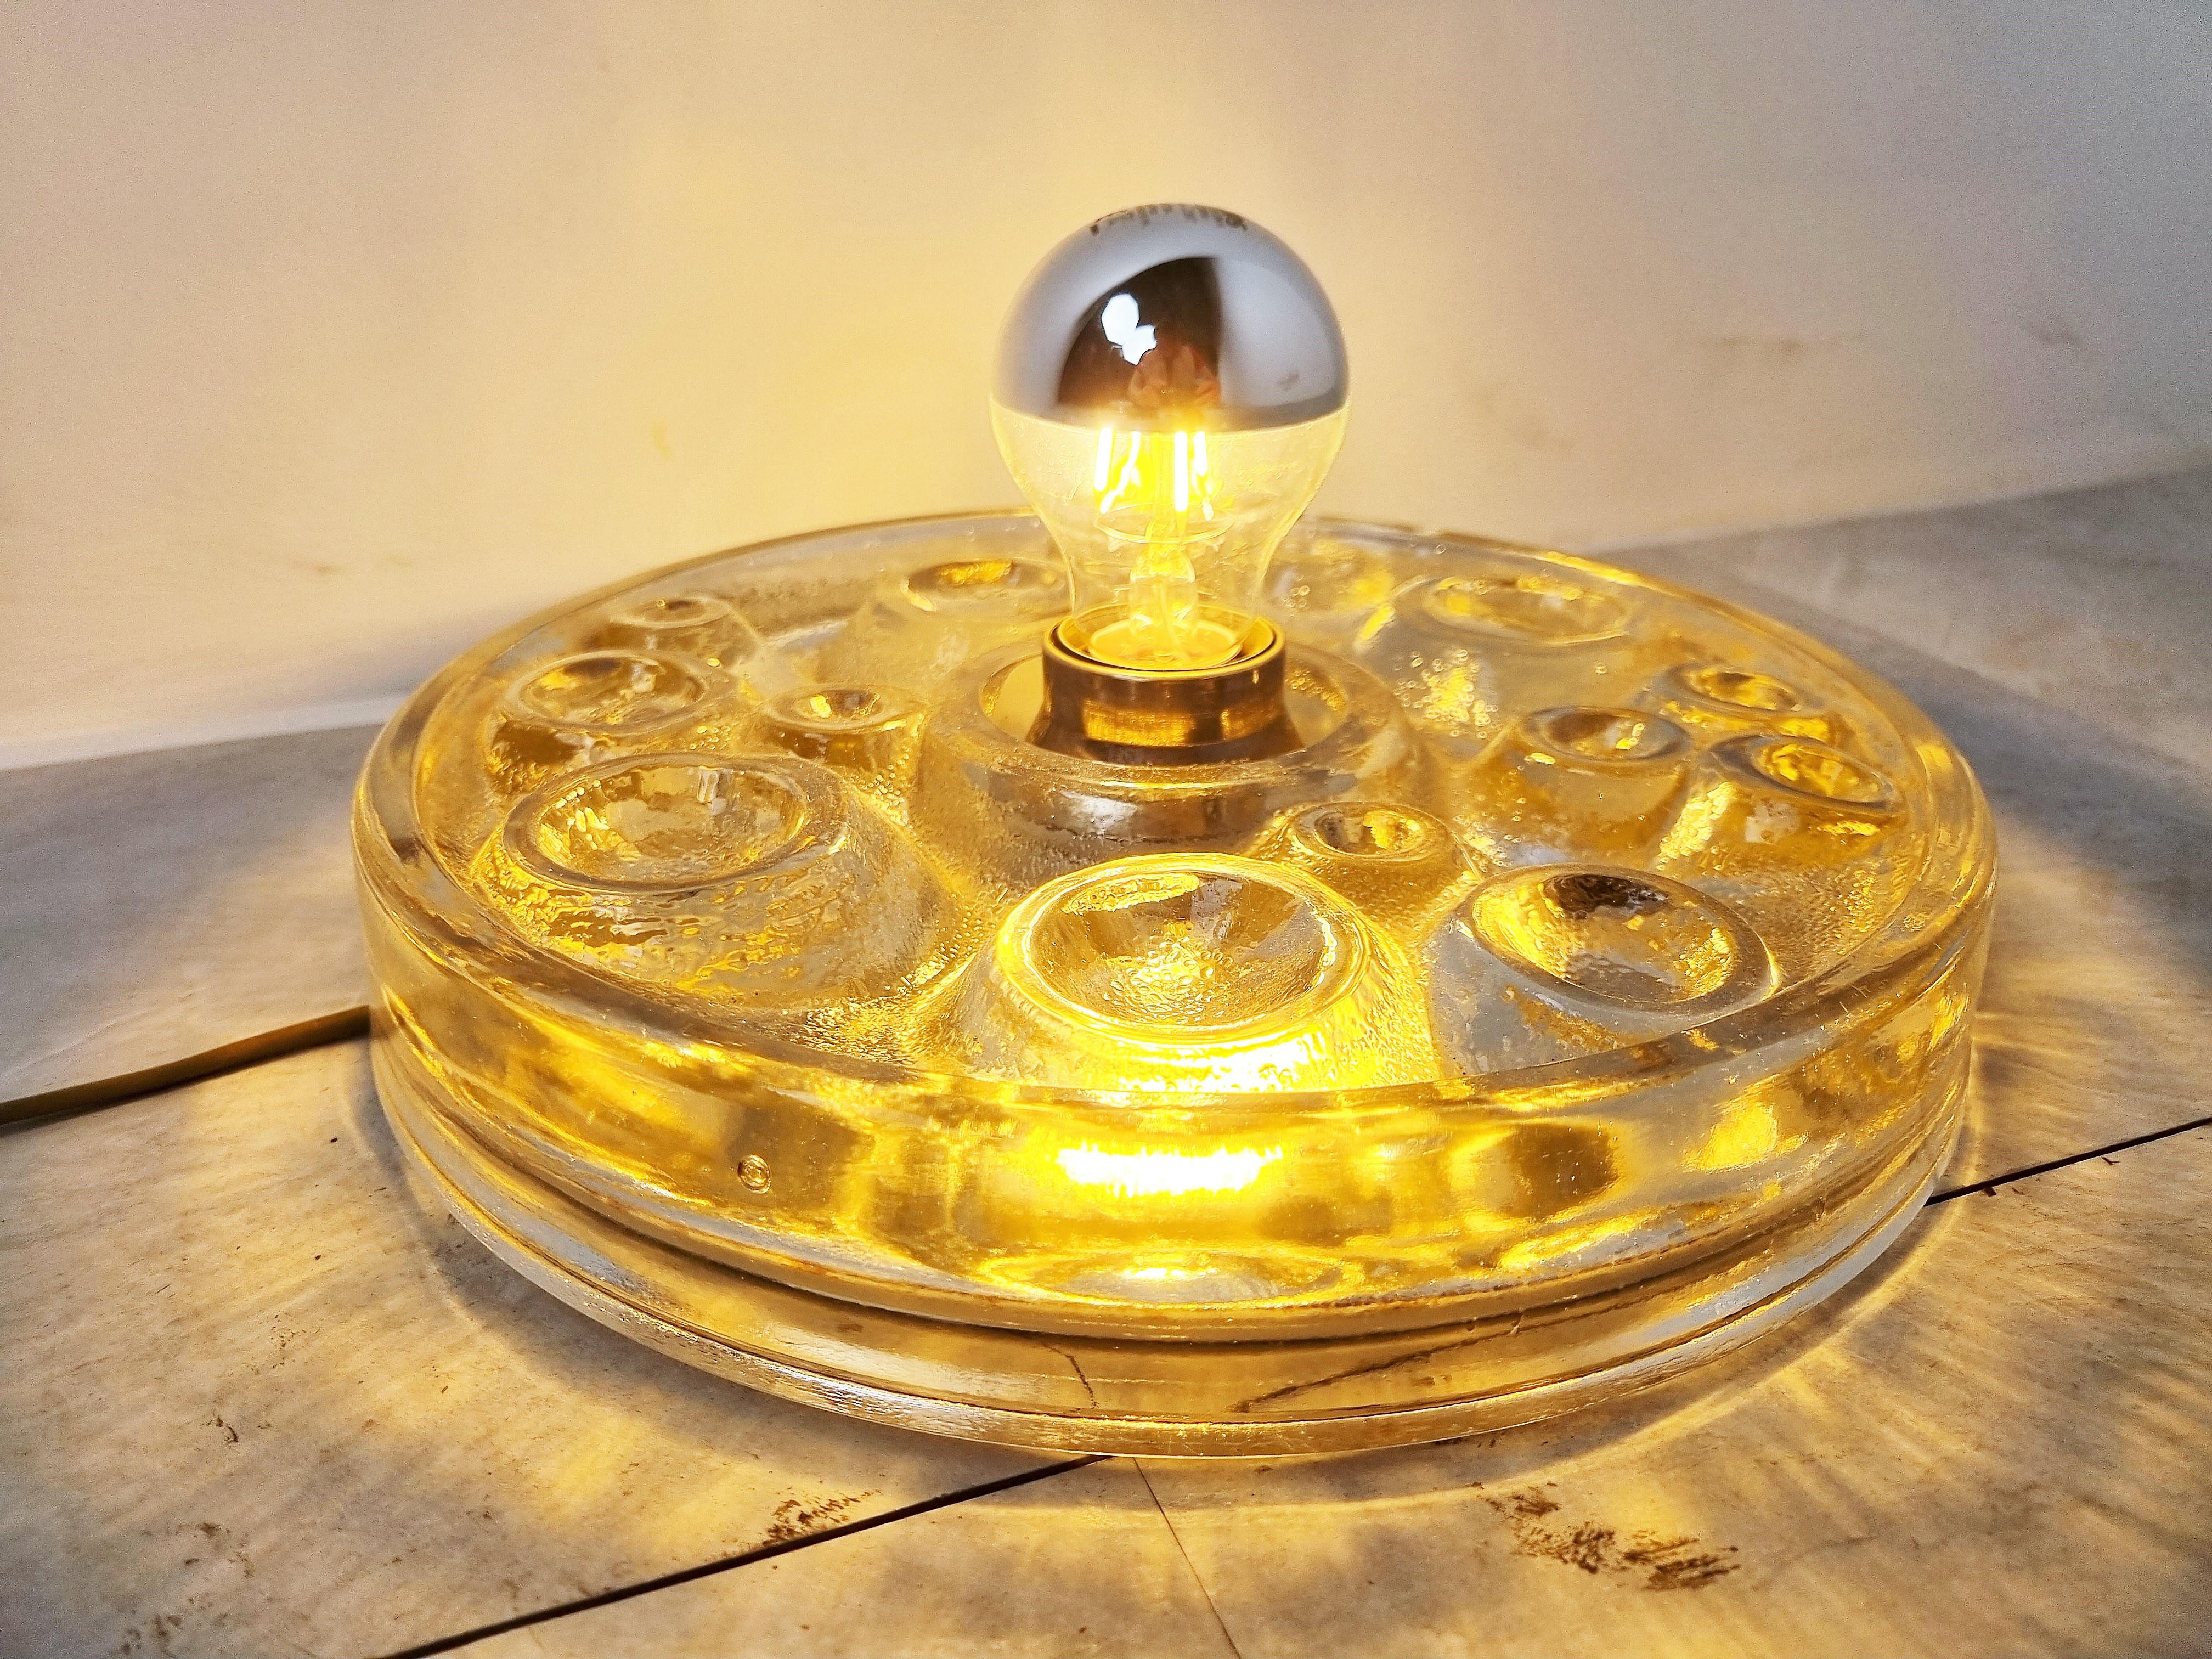 Vintage glass wall or ceiling light by Peil and Putzler.

The lamp emits a beautiful light thanks to its carefully designed glass.

Works with a regular E26/E27 light bulb, US compatible.

1970s - Germany

Dimensions:
Height: